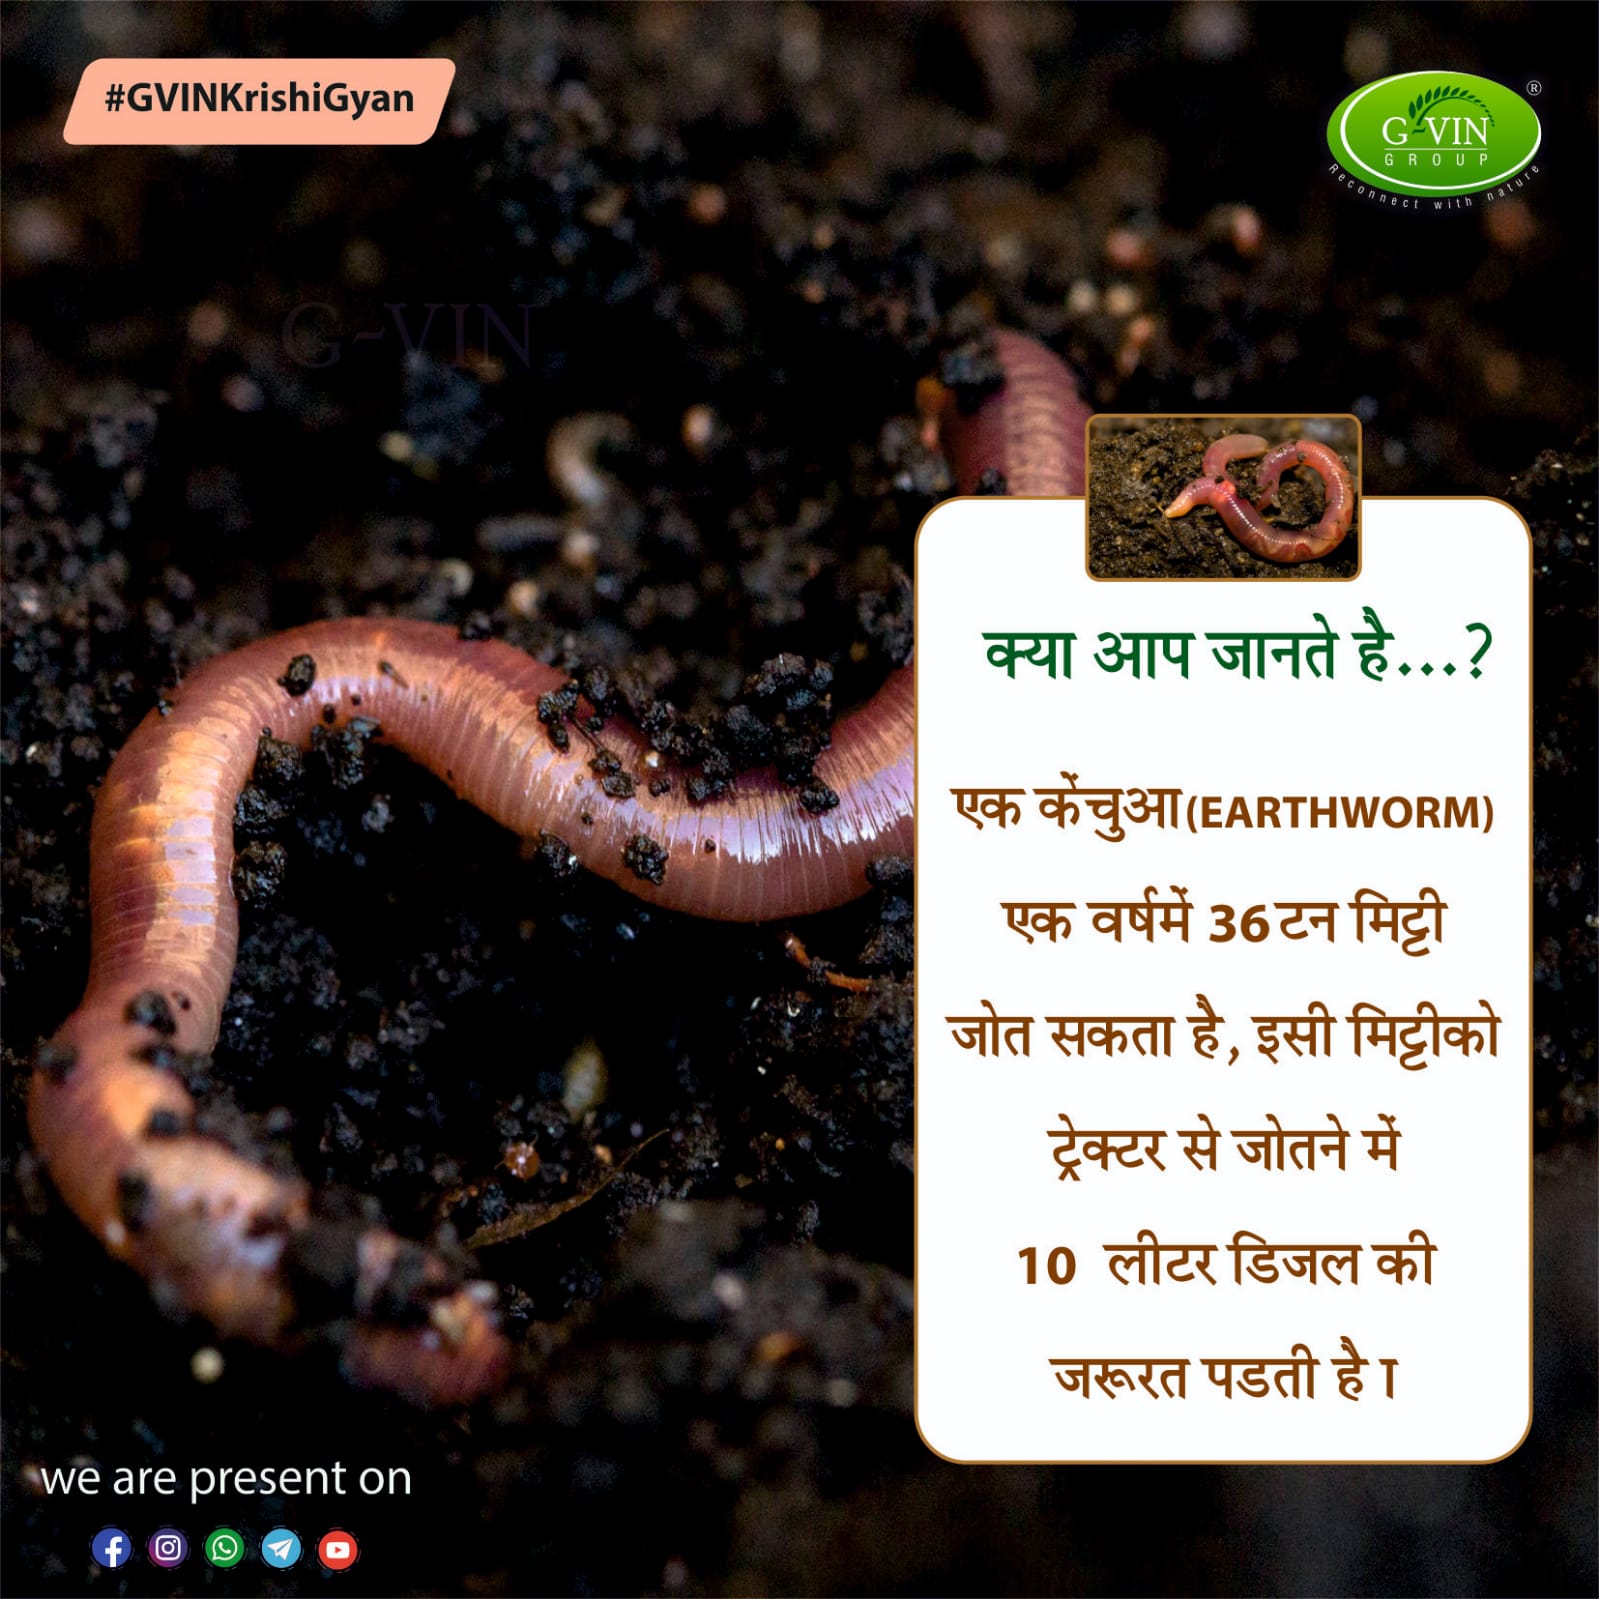 Gvin Group on X: Do you know.? A worm can cultivate 36 tons of